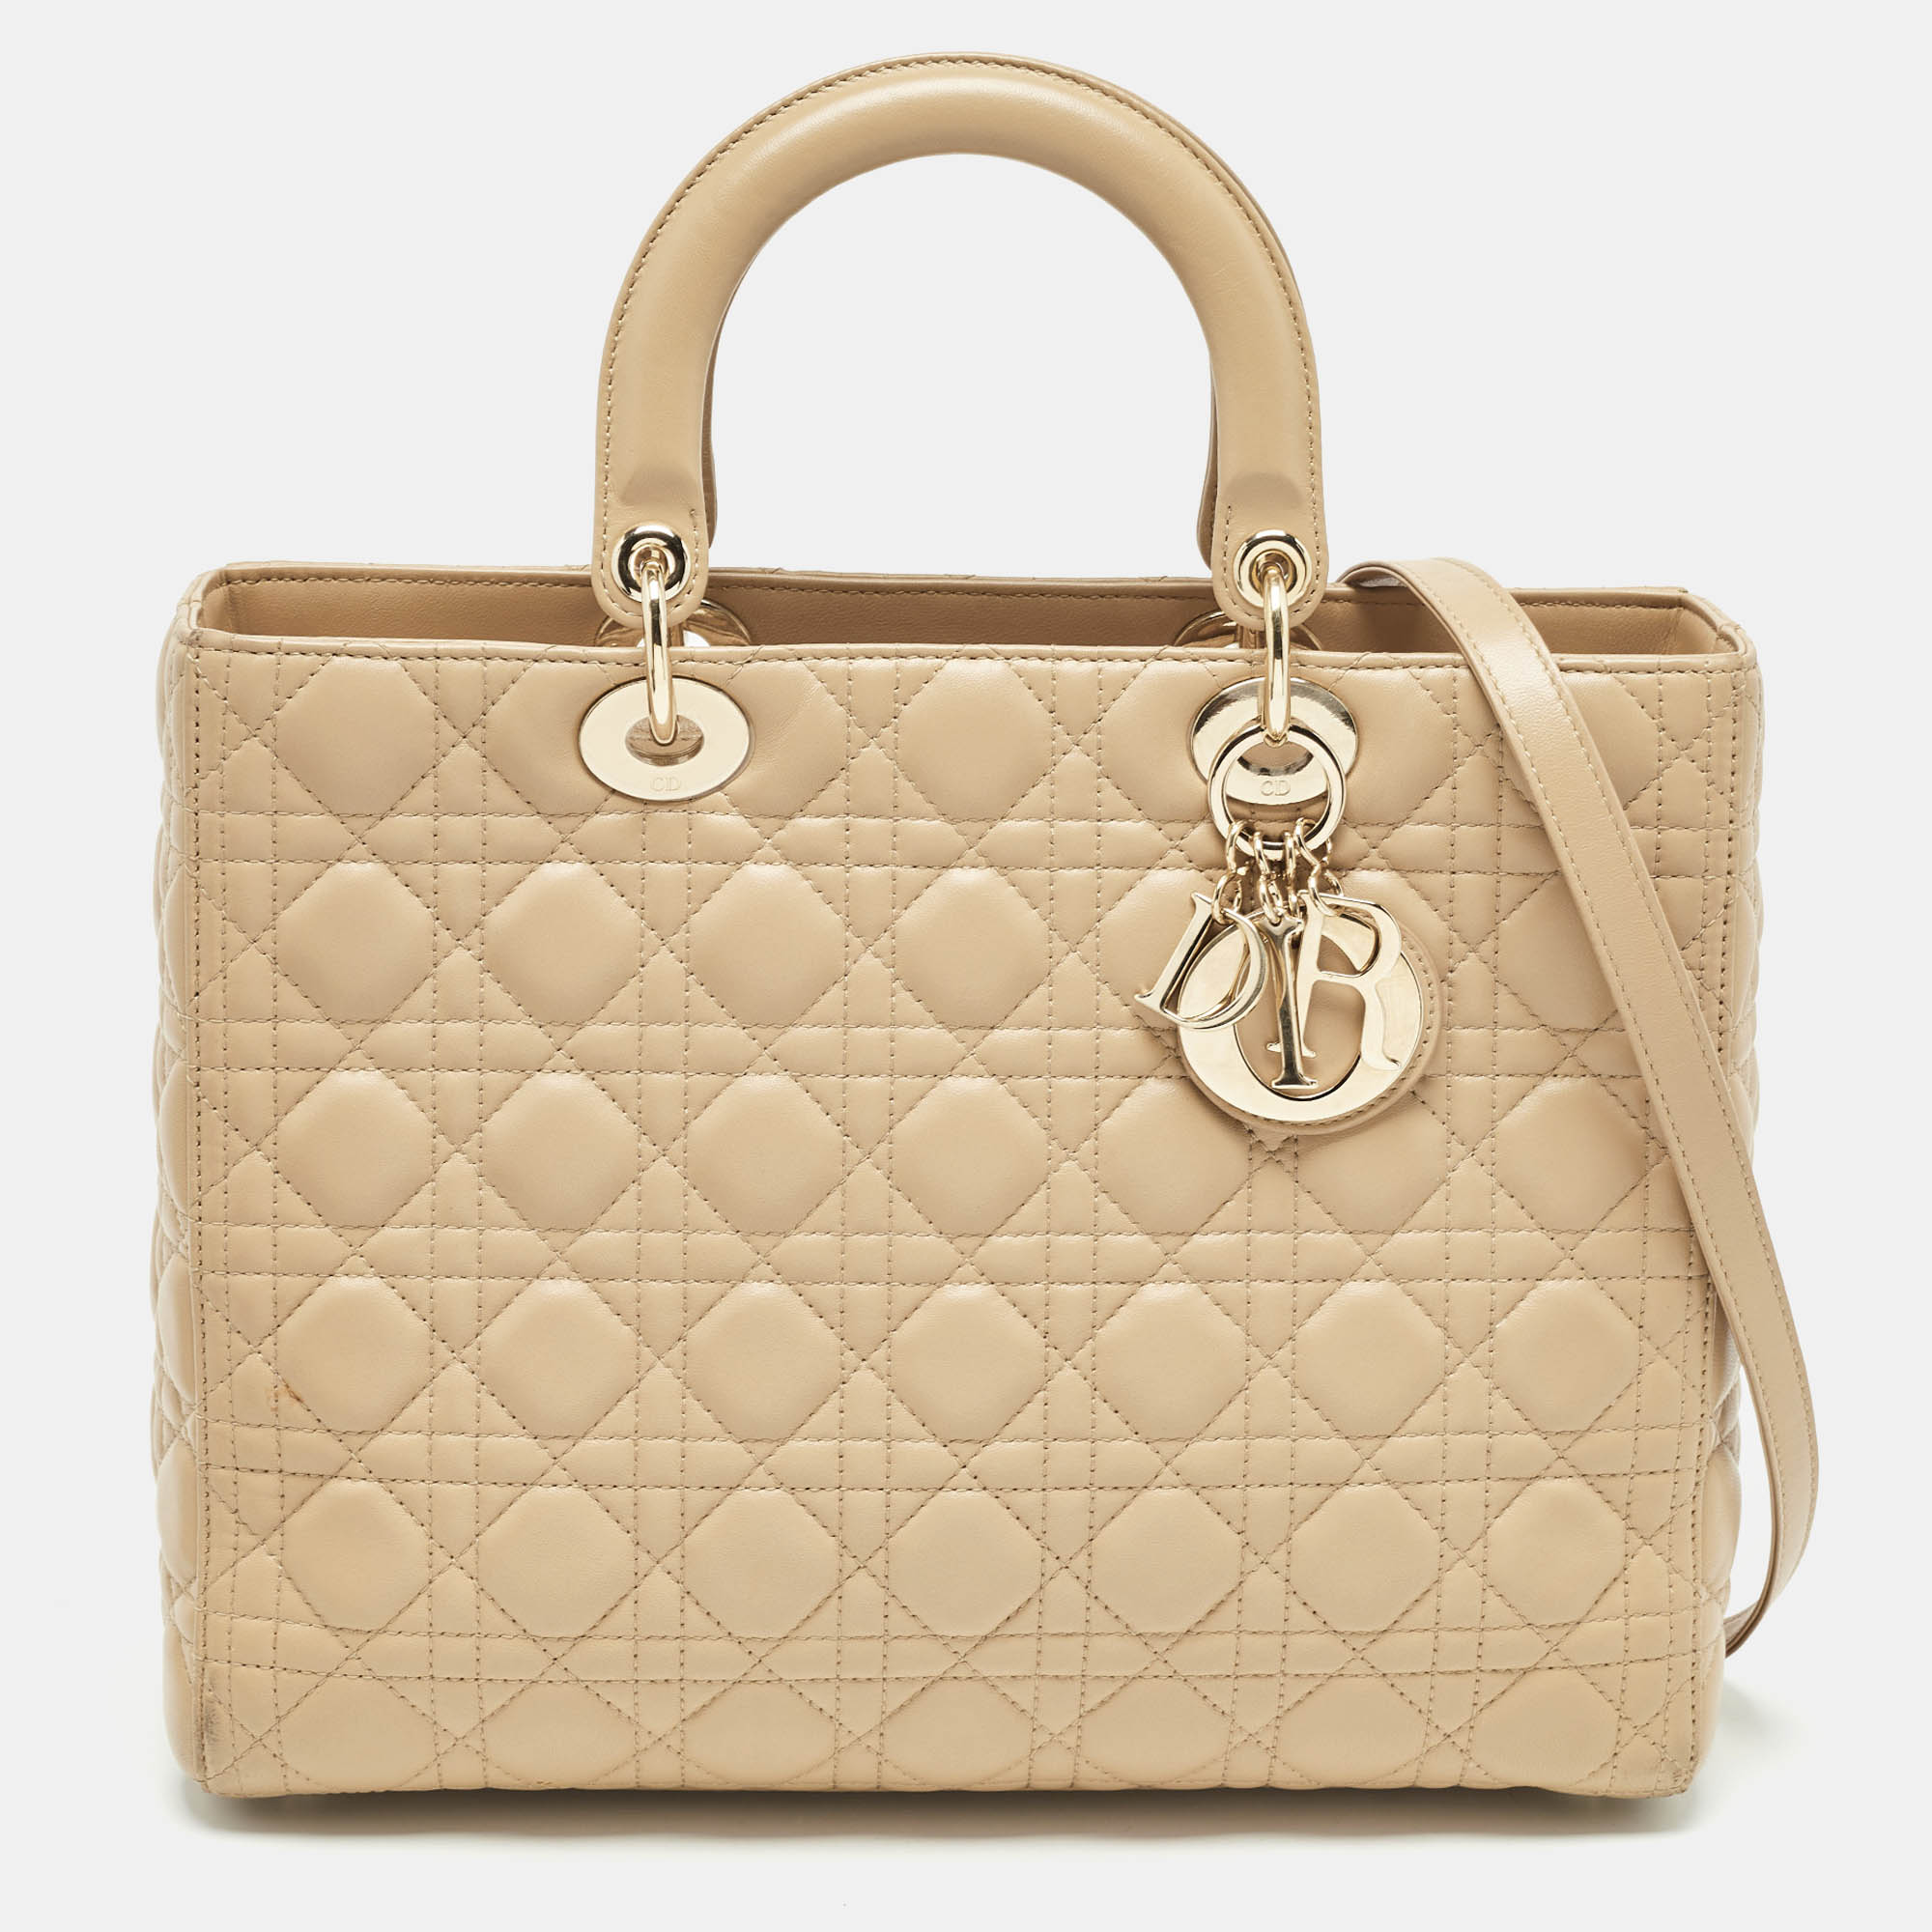 Dior beige cannage leather large lady dior tote